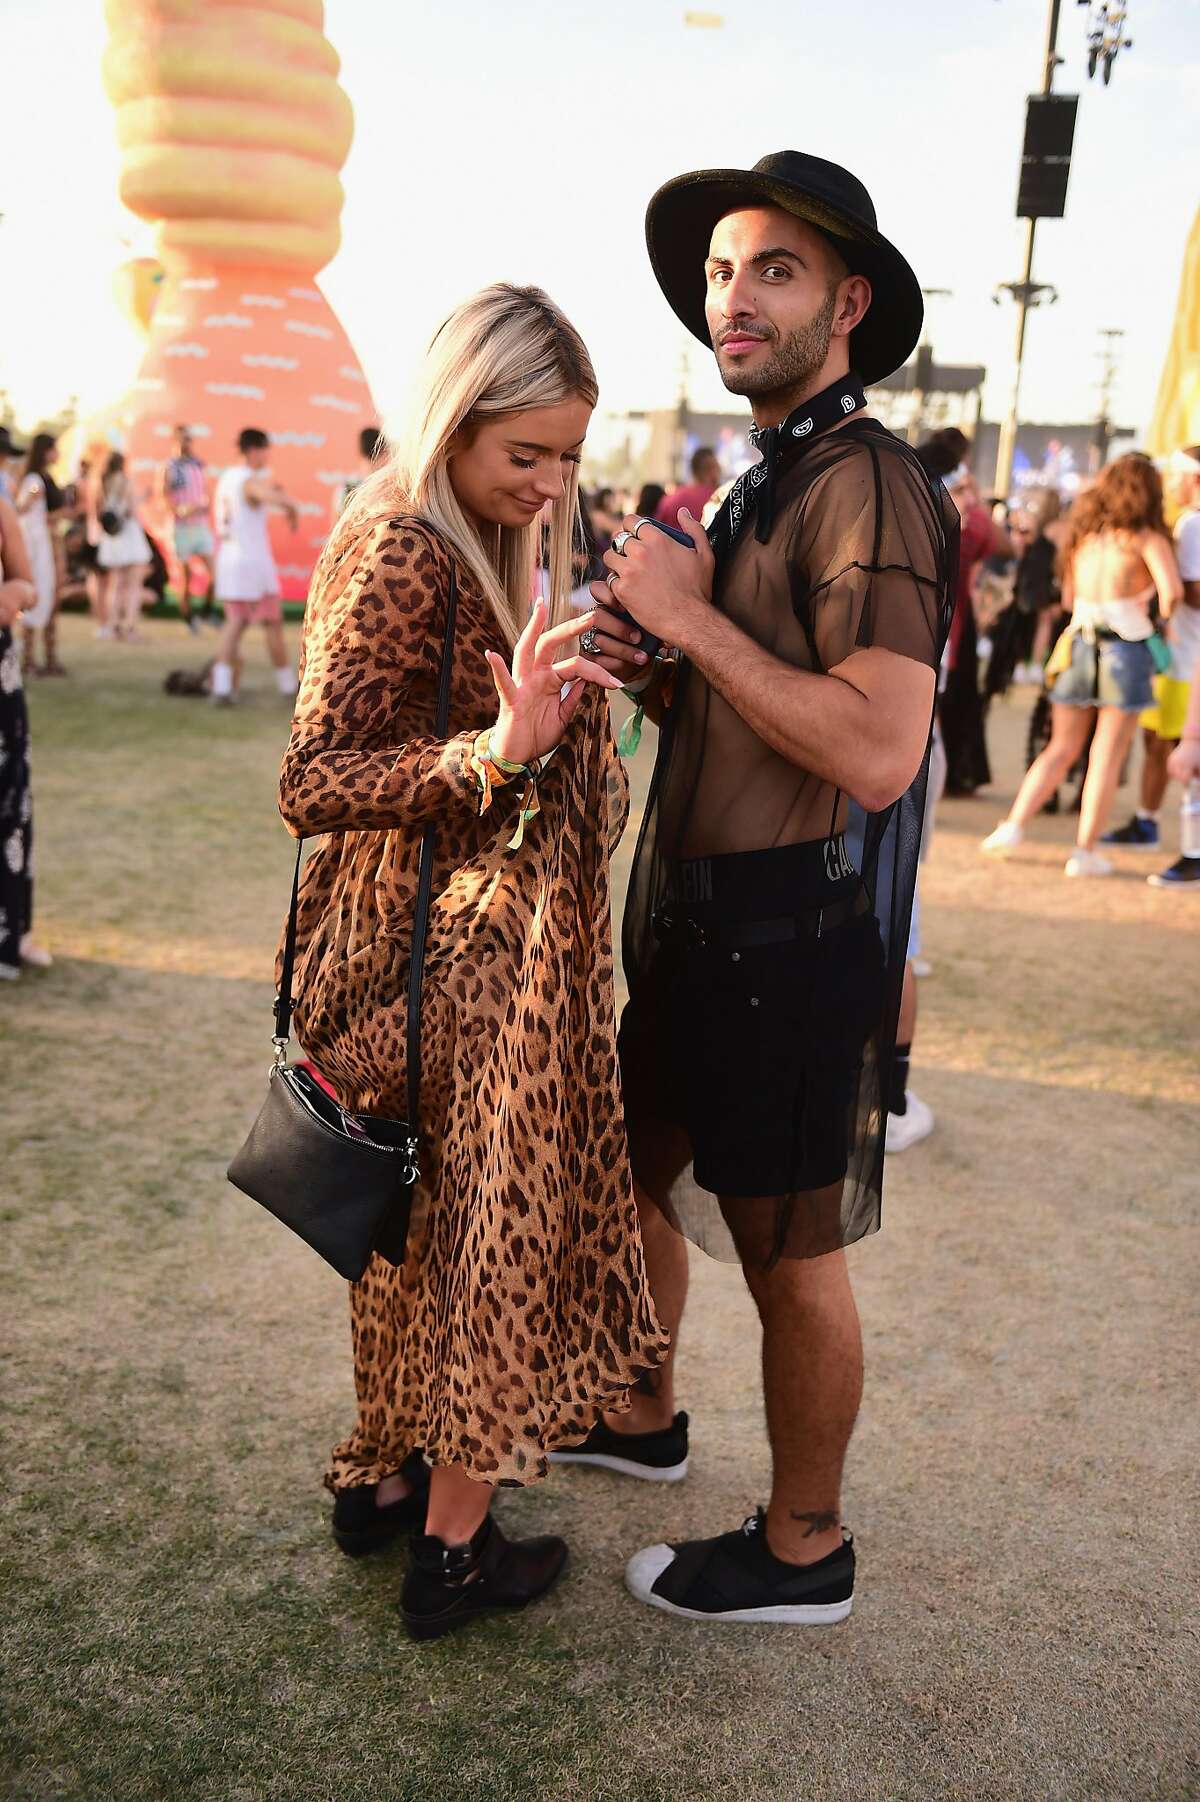 The best outfits from Coachella 2017